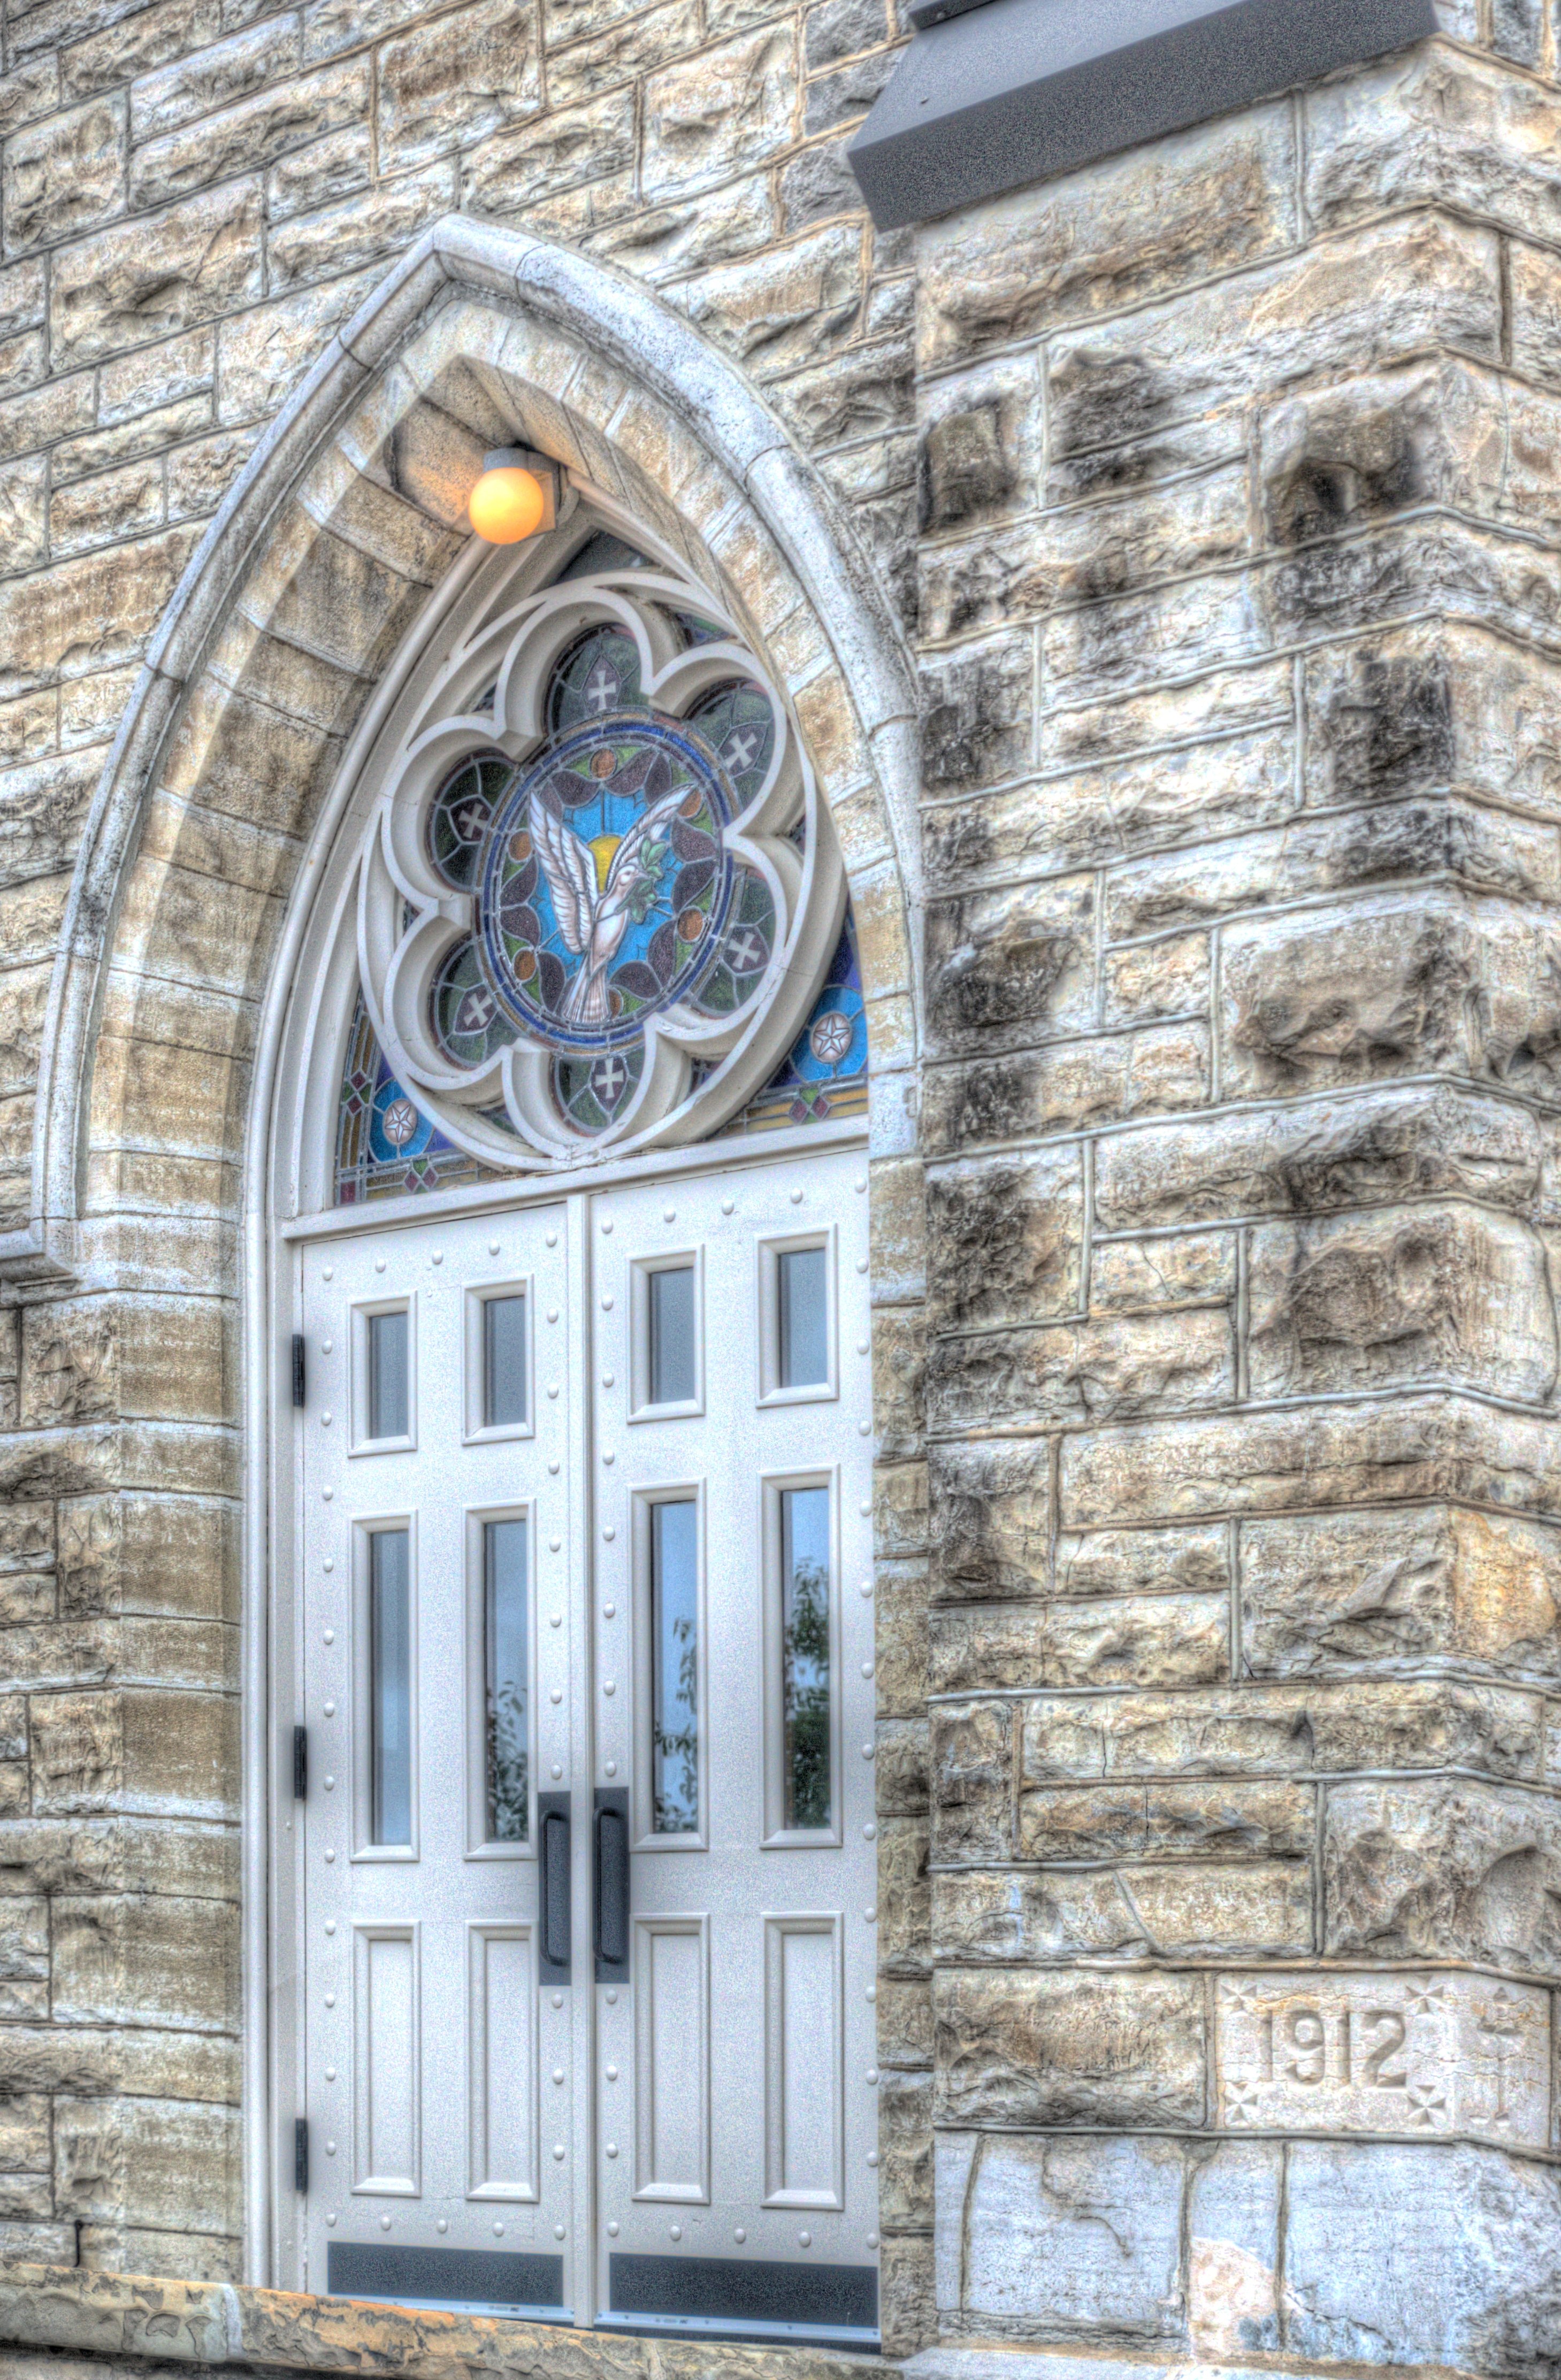 Outside image of St. Margaret's beautiful front doors with a holy spirit dove stain glass above the door.